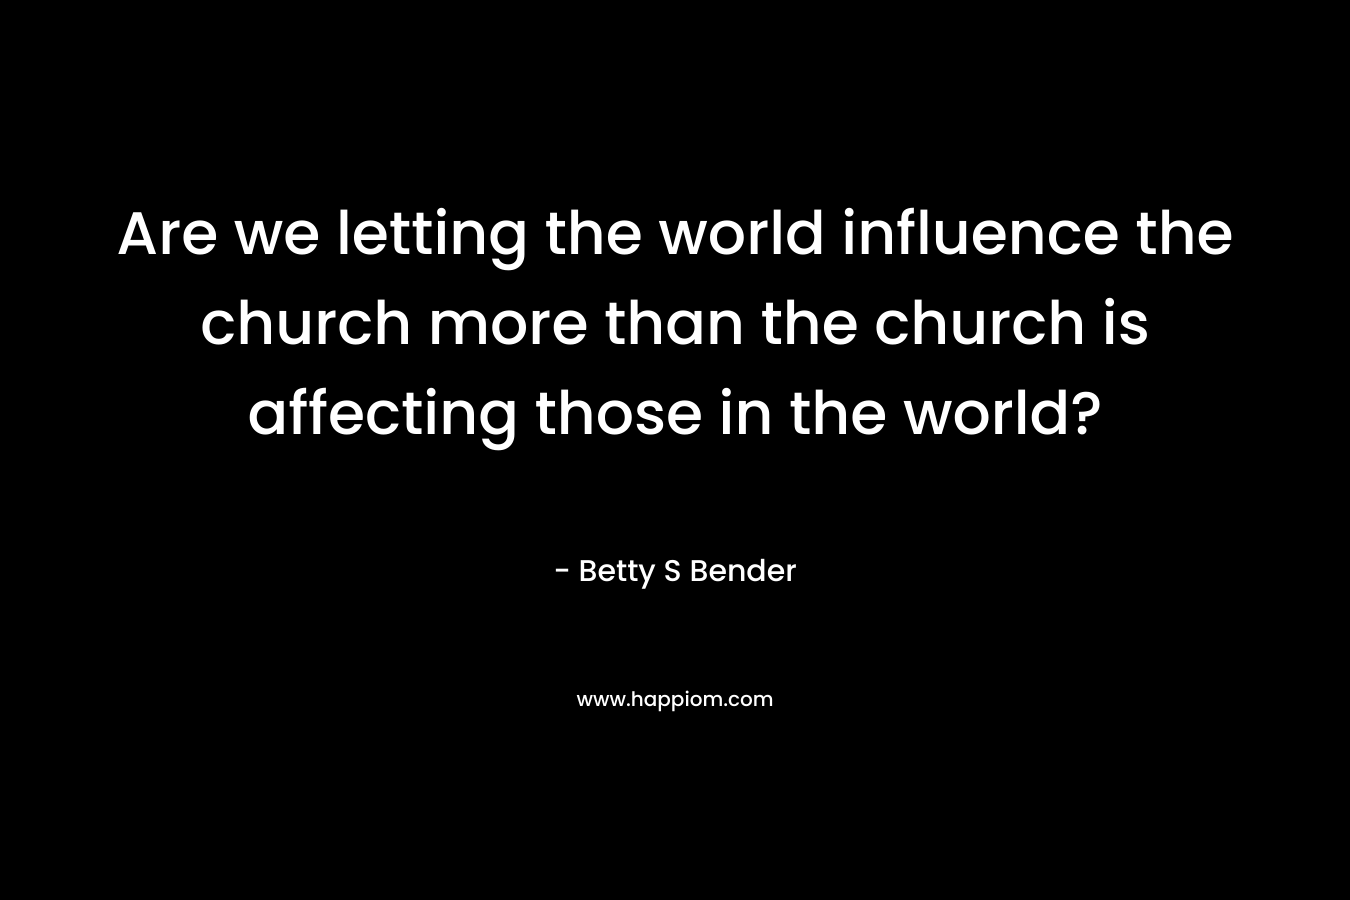 Are we letting the world influence the church more than the church is affecting those in the world? – Betty S Bender